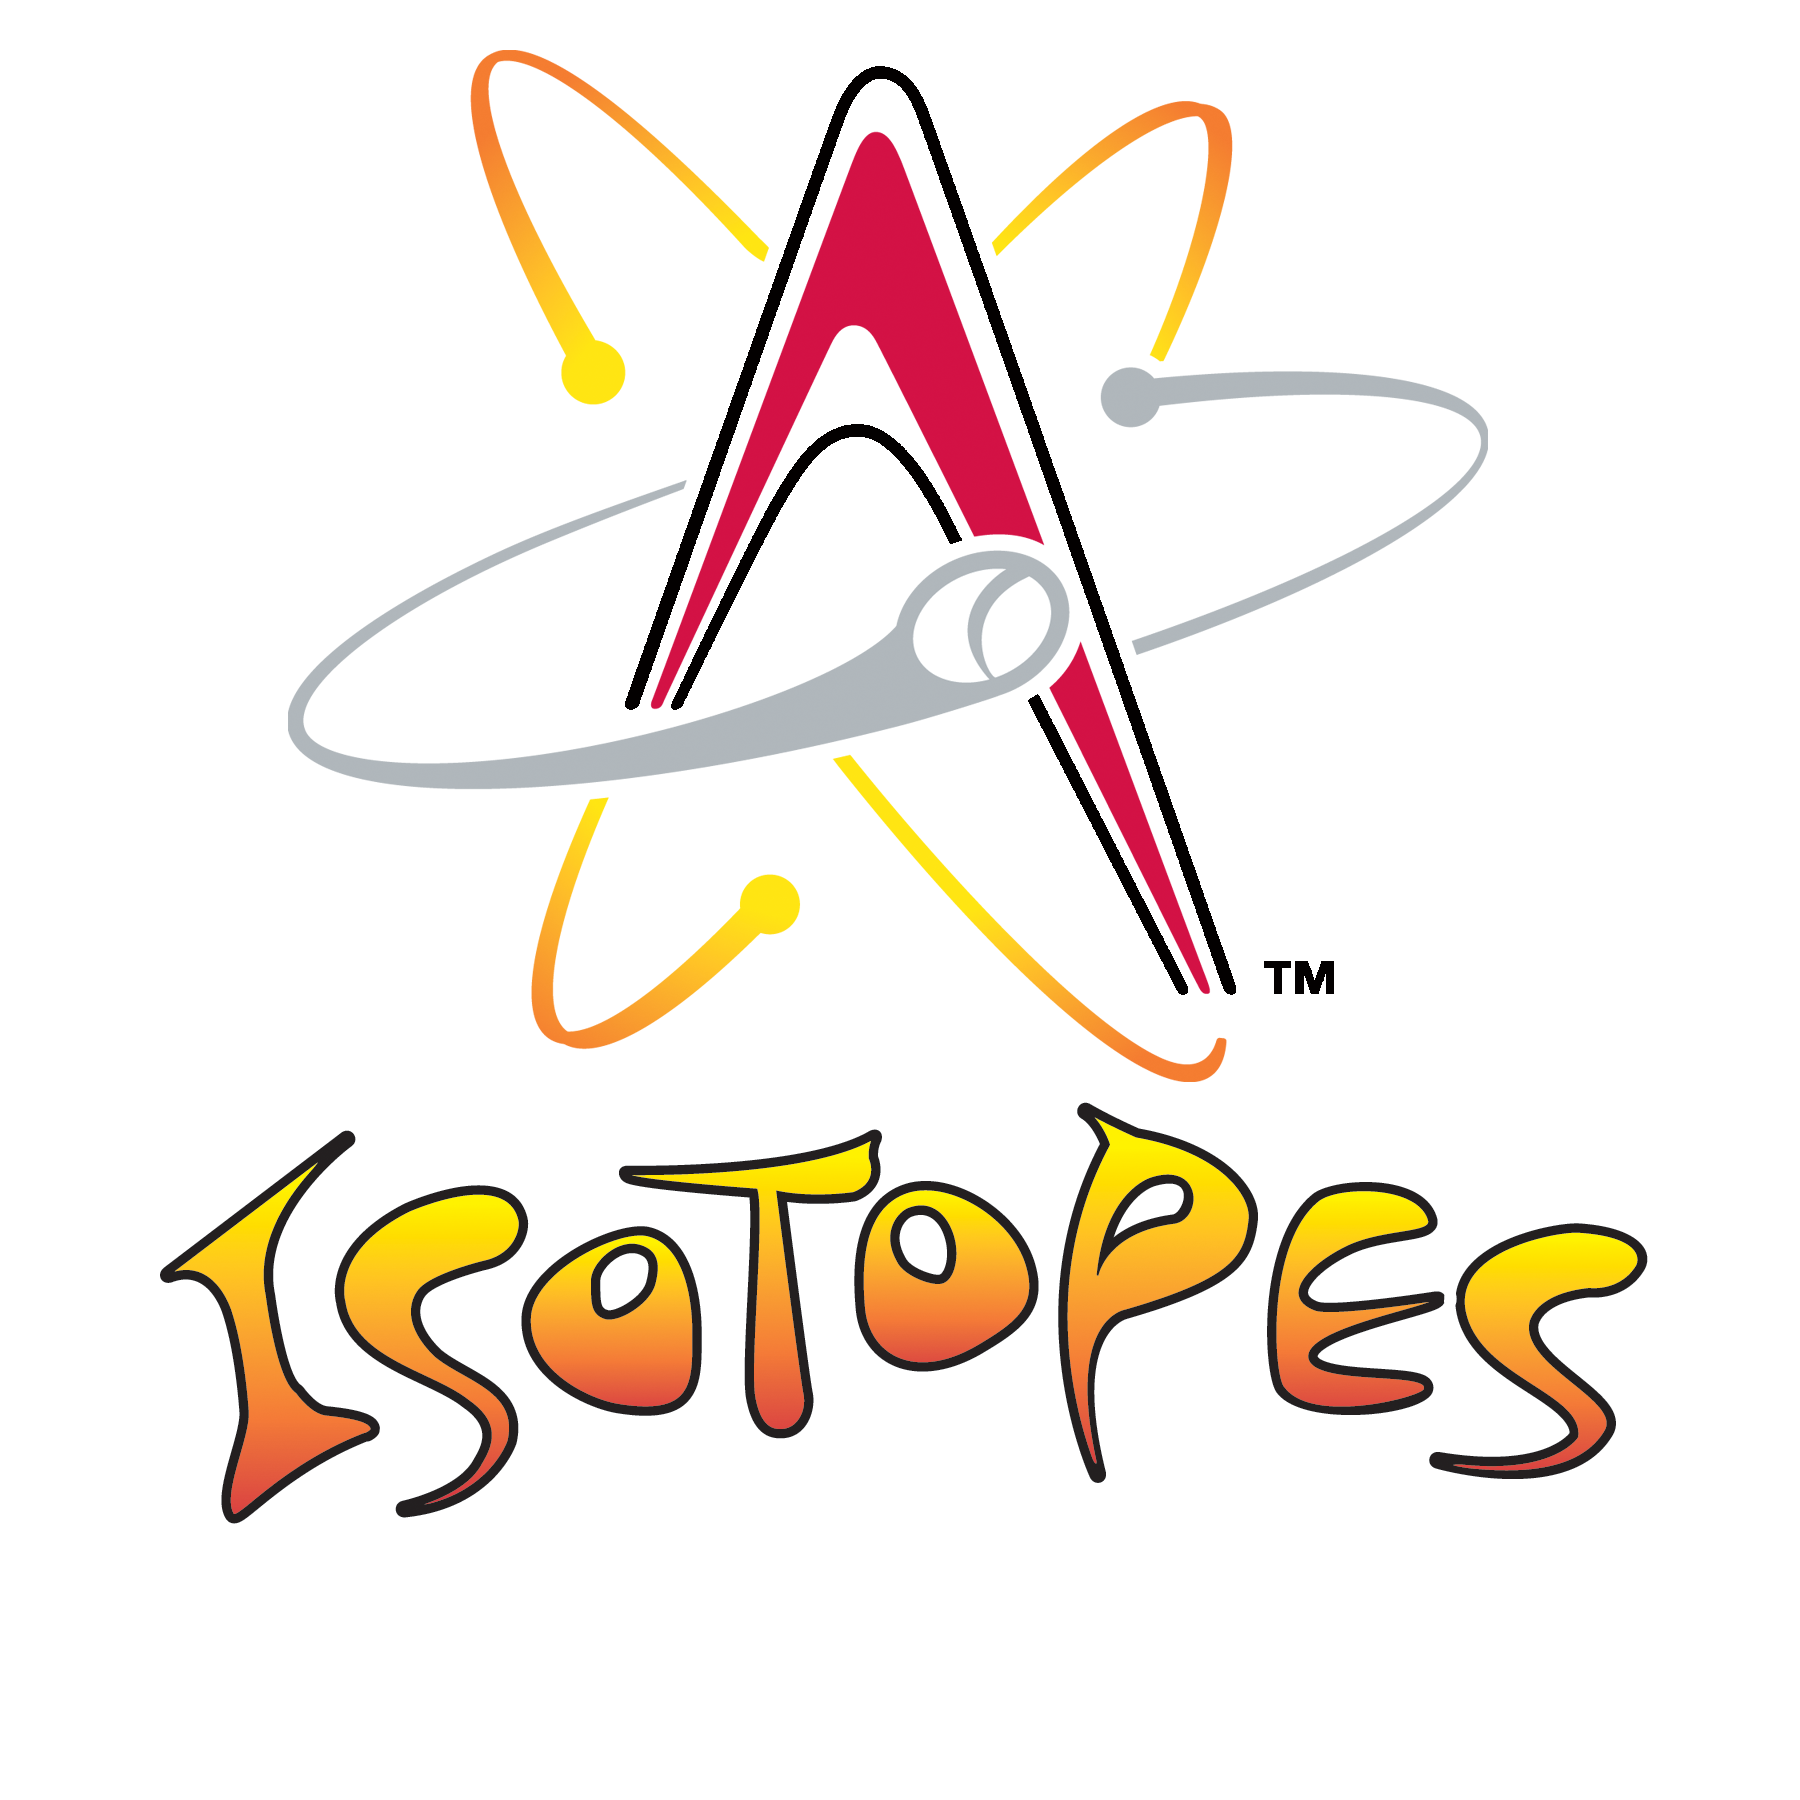 Les isotopes